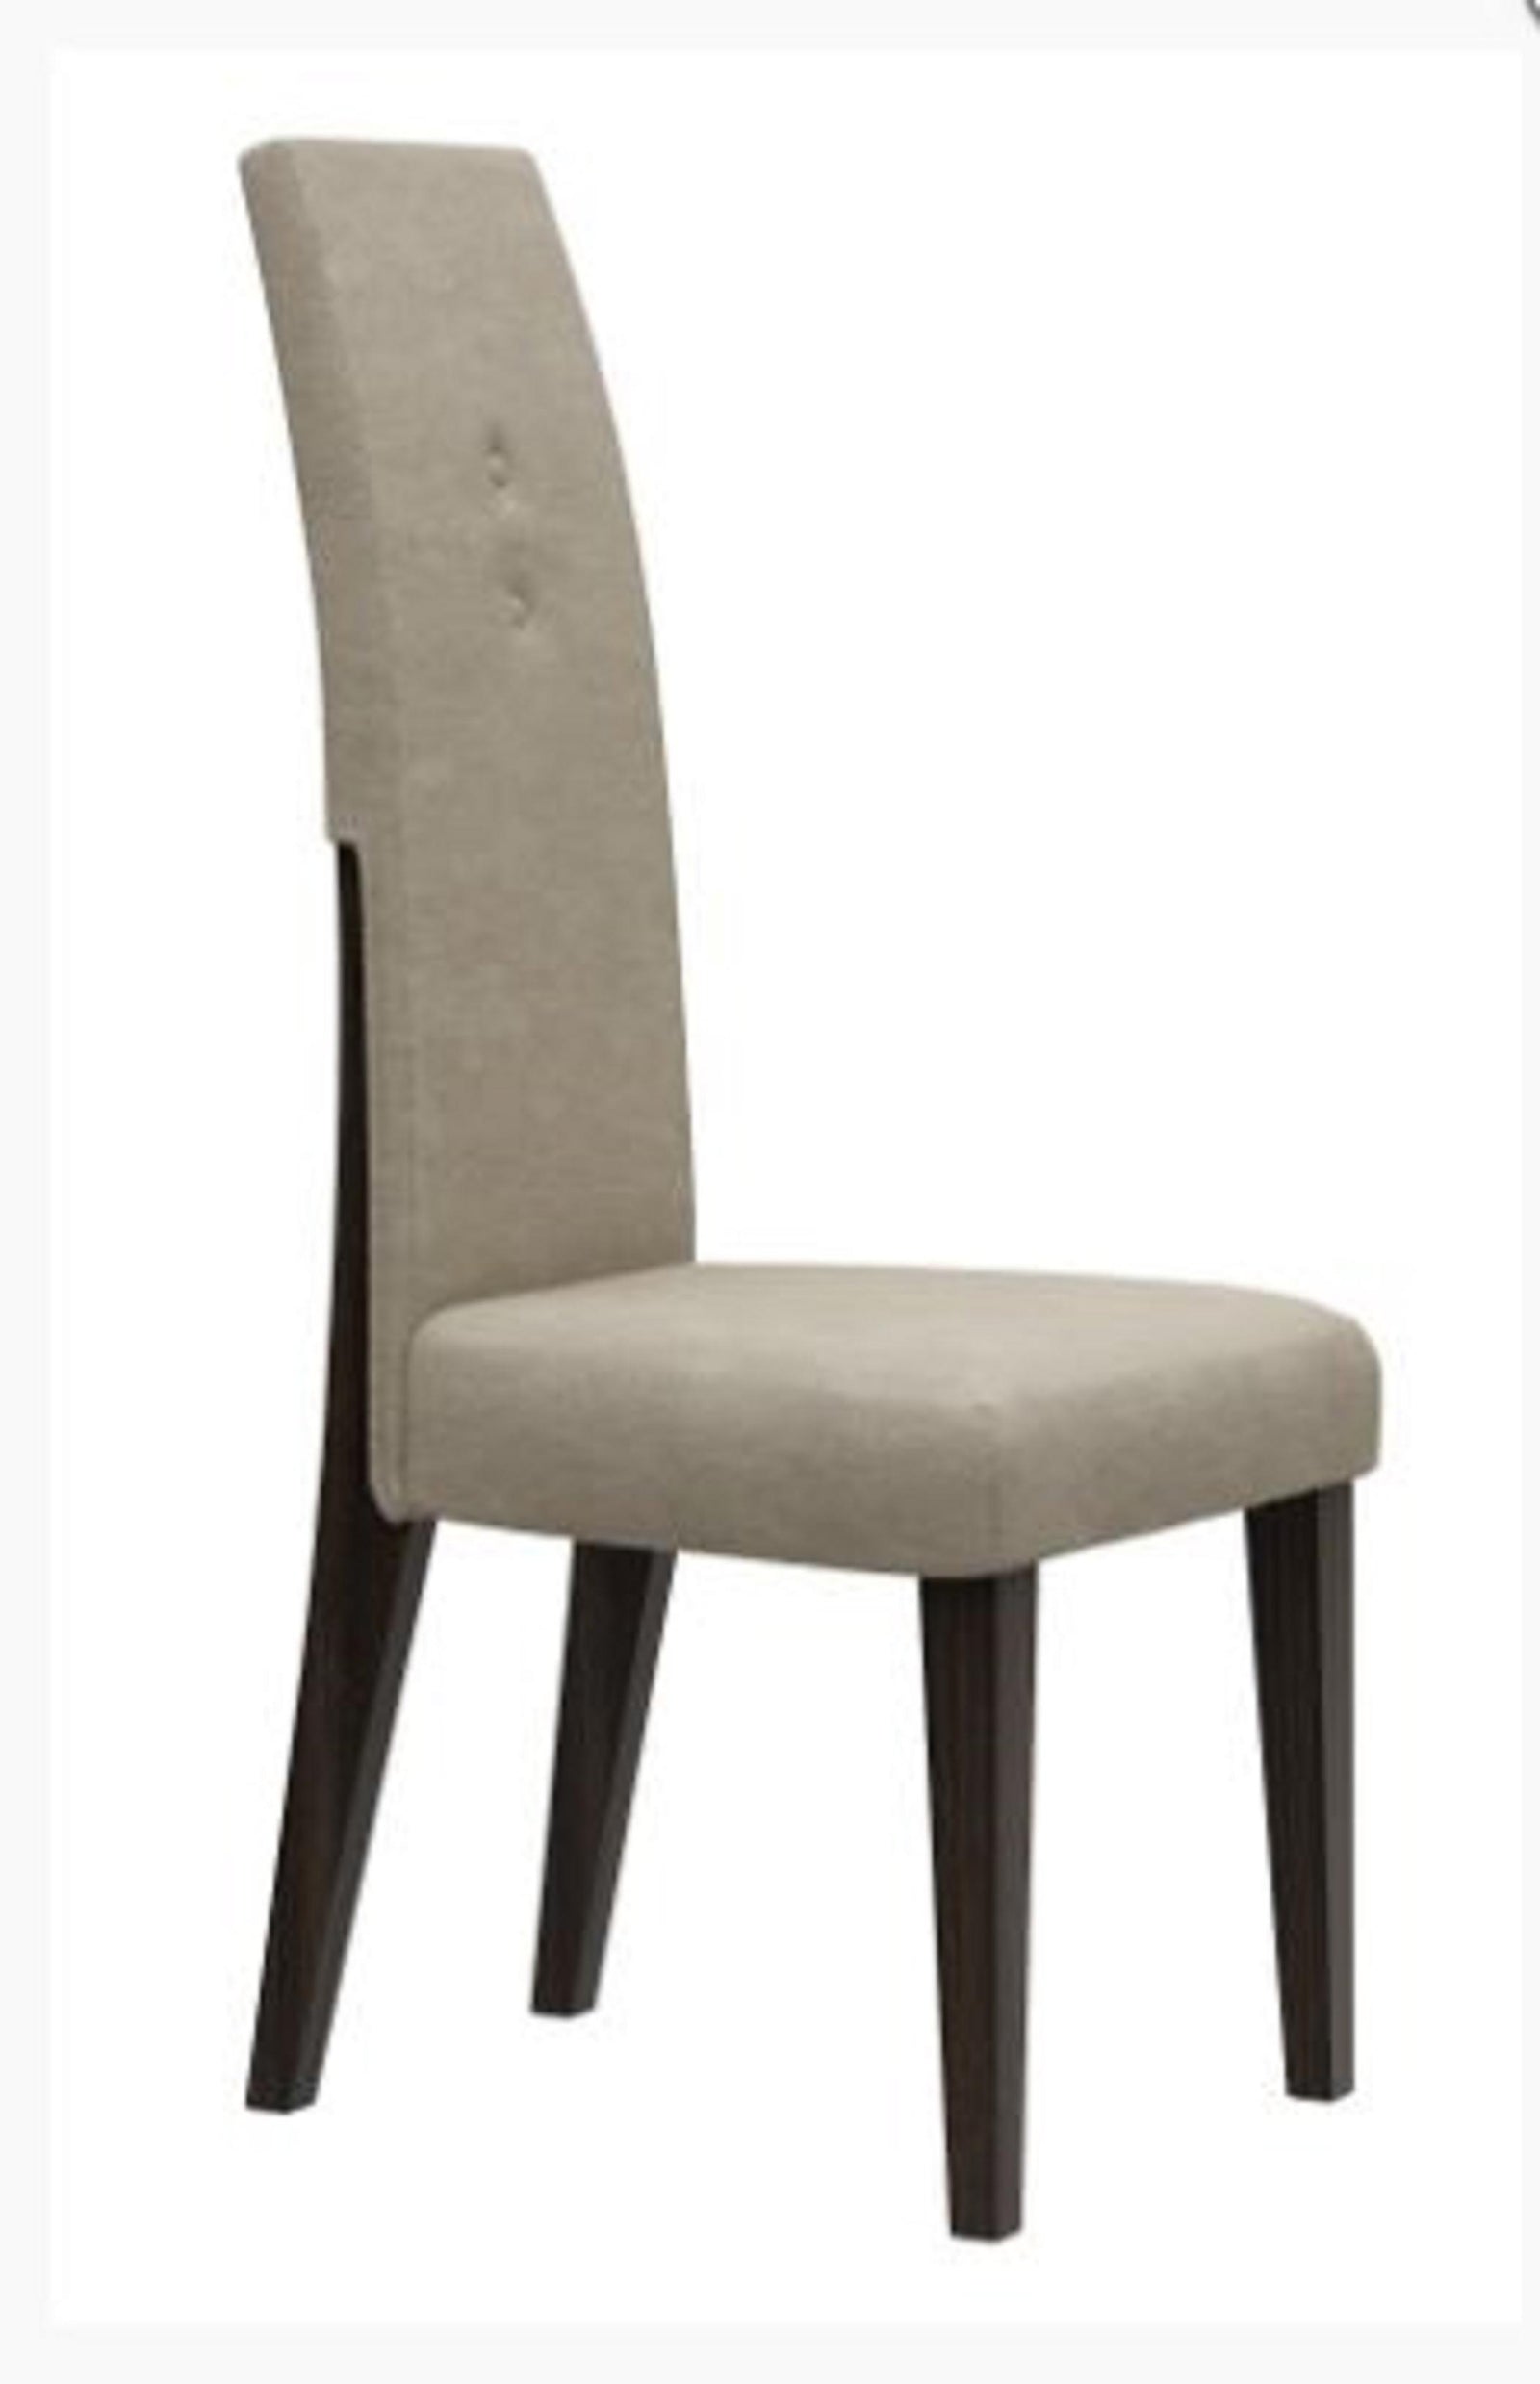 Wenge Contemporary Modern Seat Furniture Dining Chair